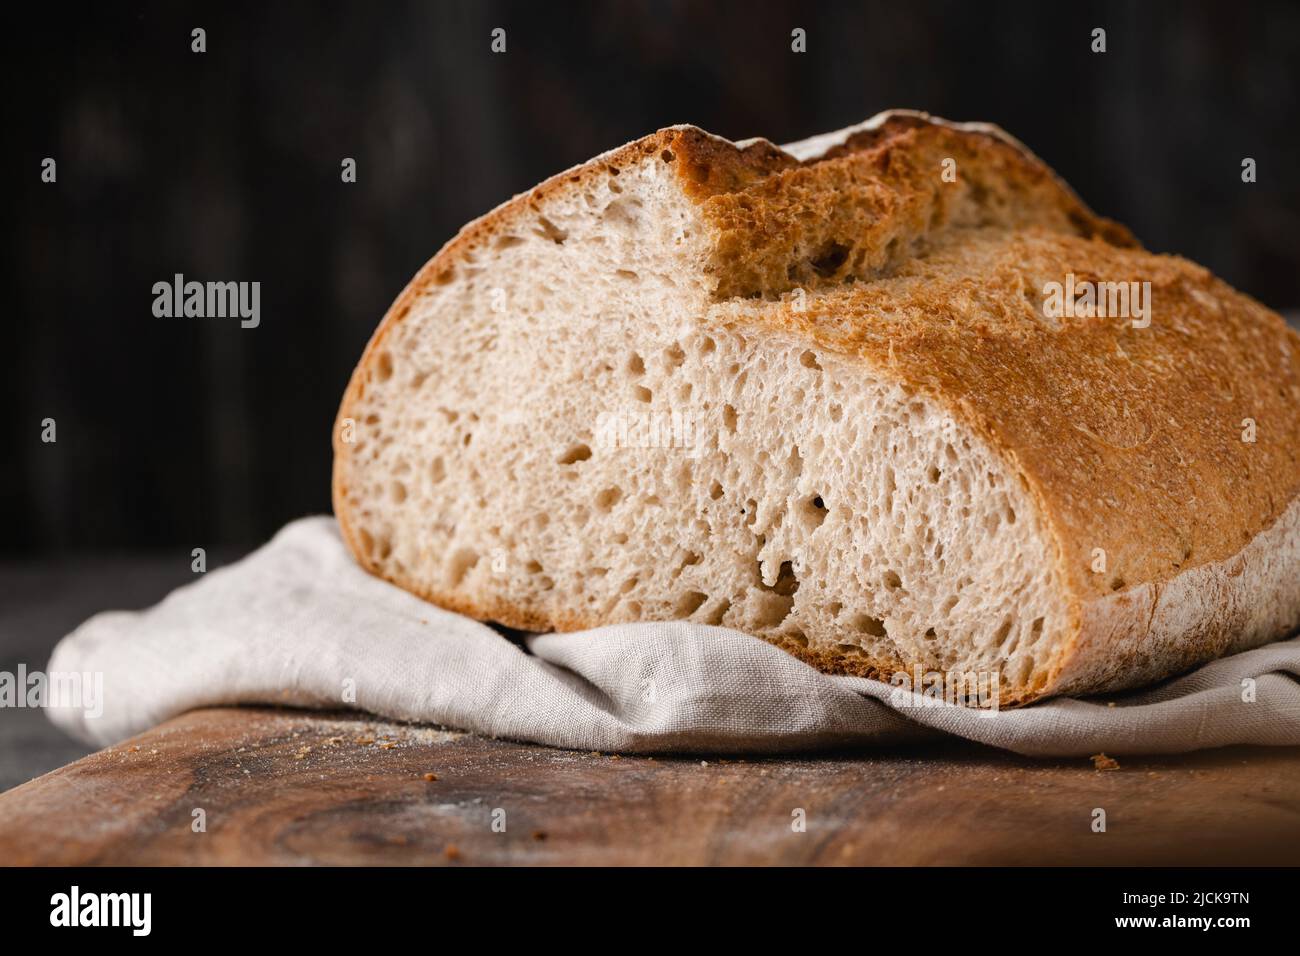 Sourdough loaf of bread on cutting board. Stock Photo